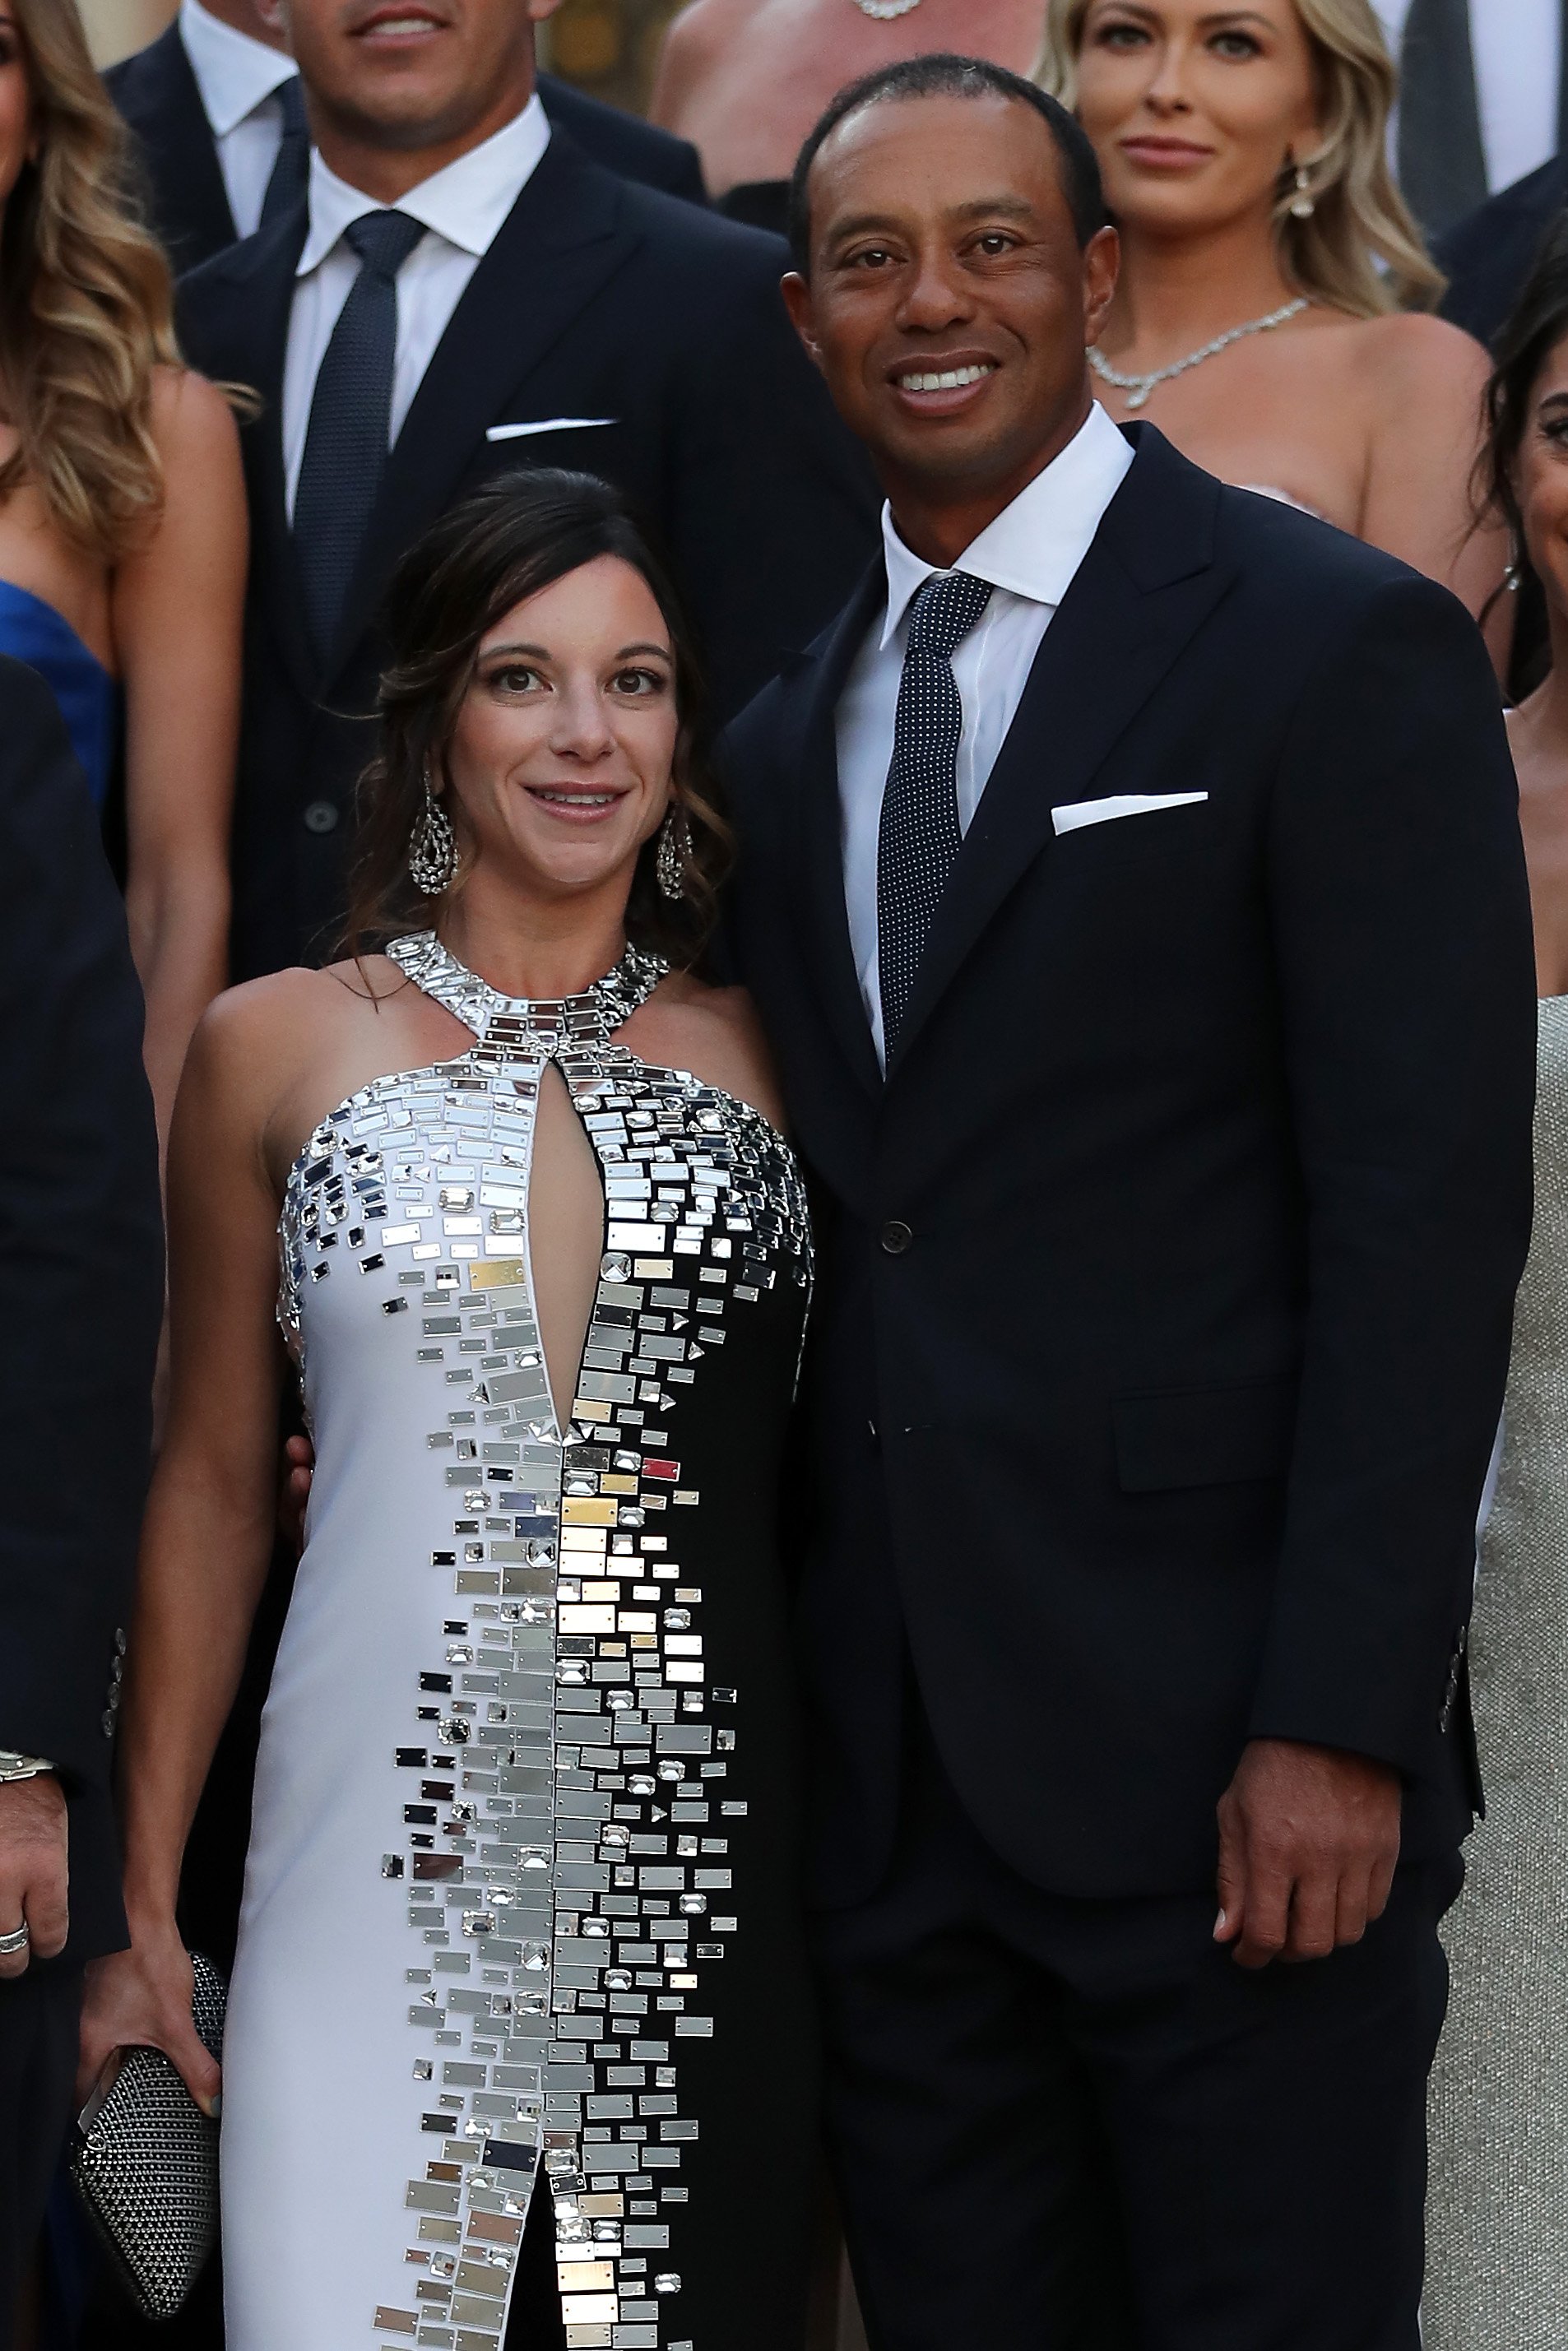 Tiger Woods and Erica Herman before the Ryder Cup gala dinner at the Palace of Versailles. September, 2018. | Photo: GettyImages 